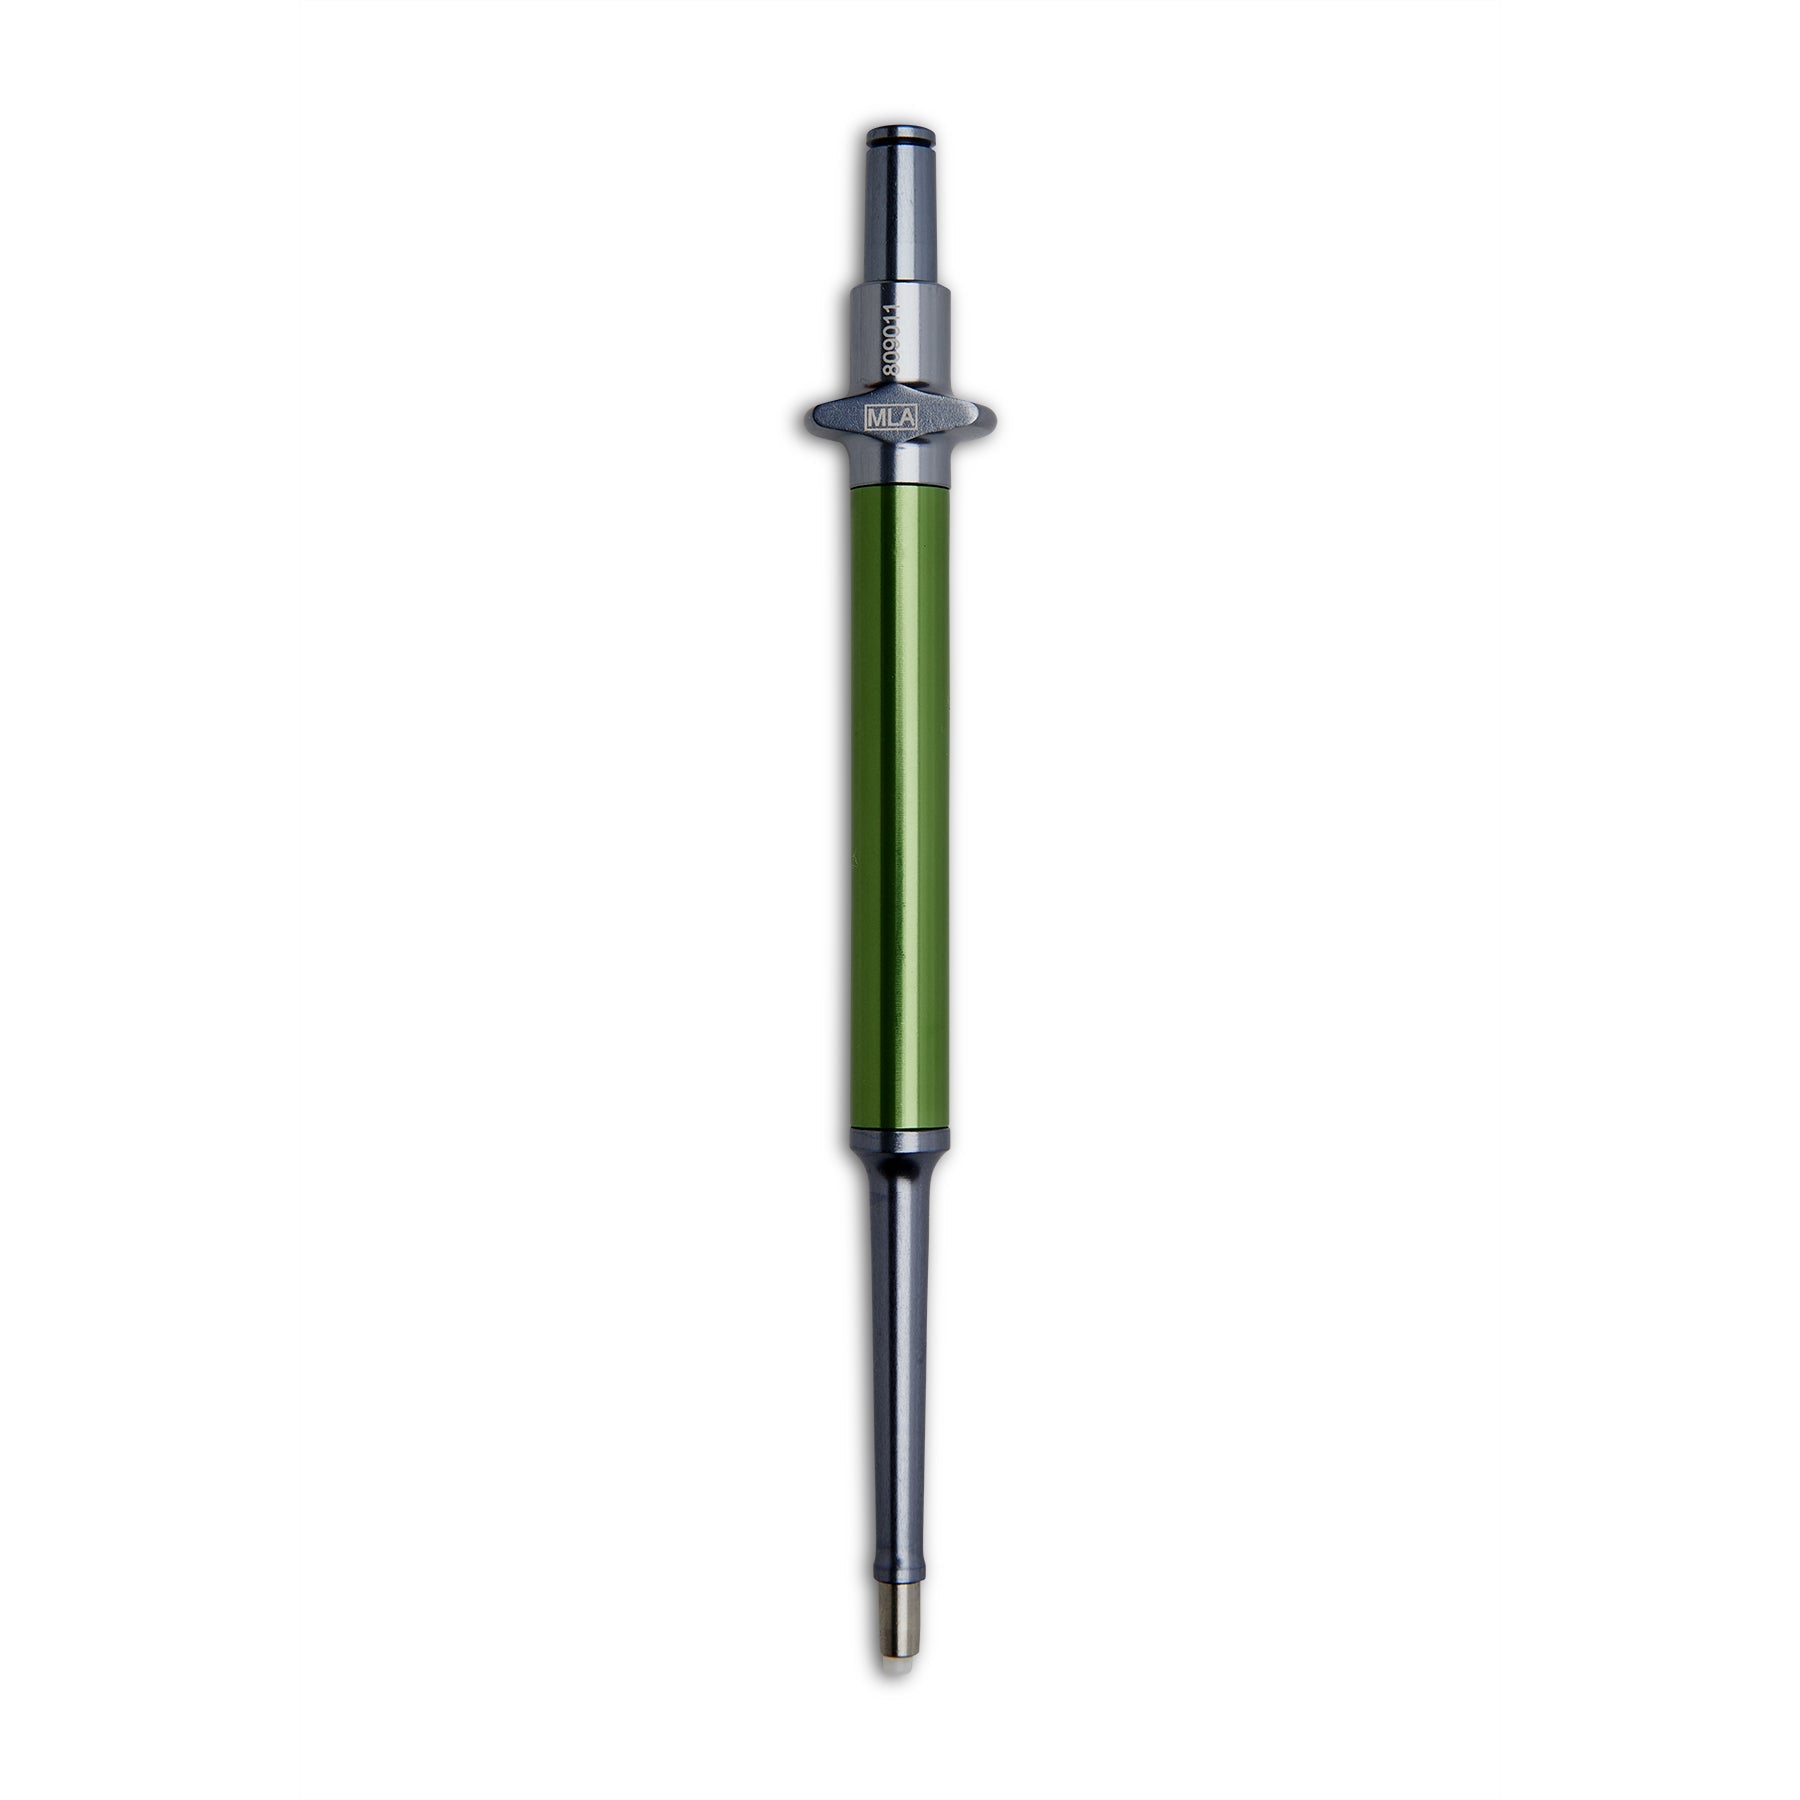 VistaLab 1024 Fixed-Volume Pipette, Green, 50 uL